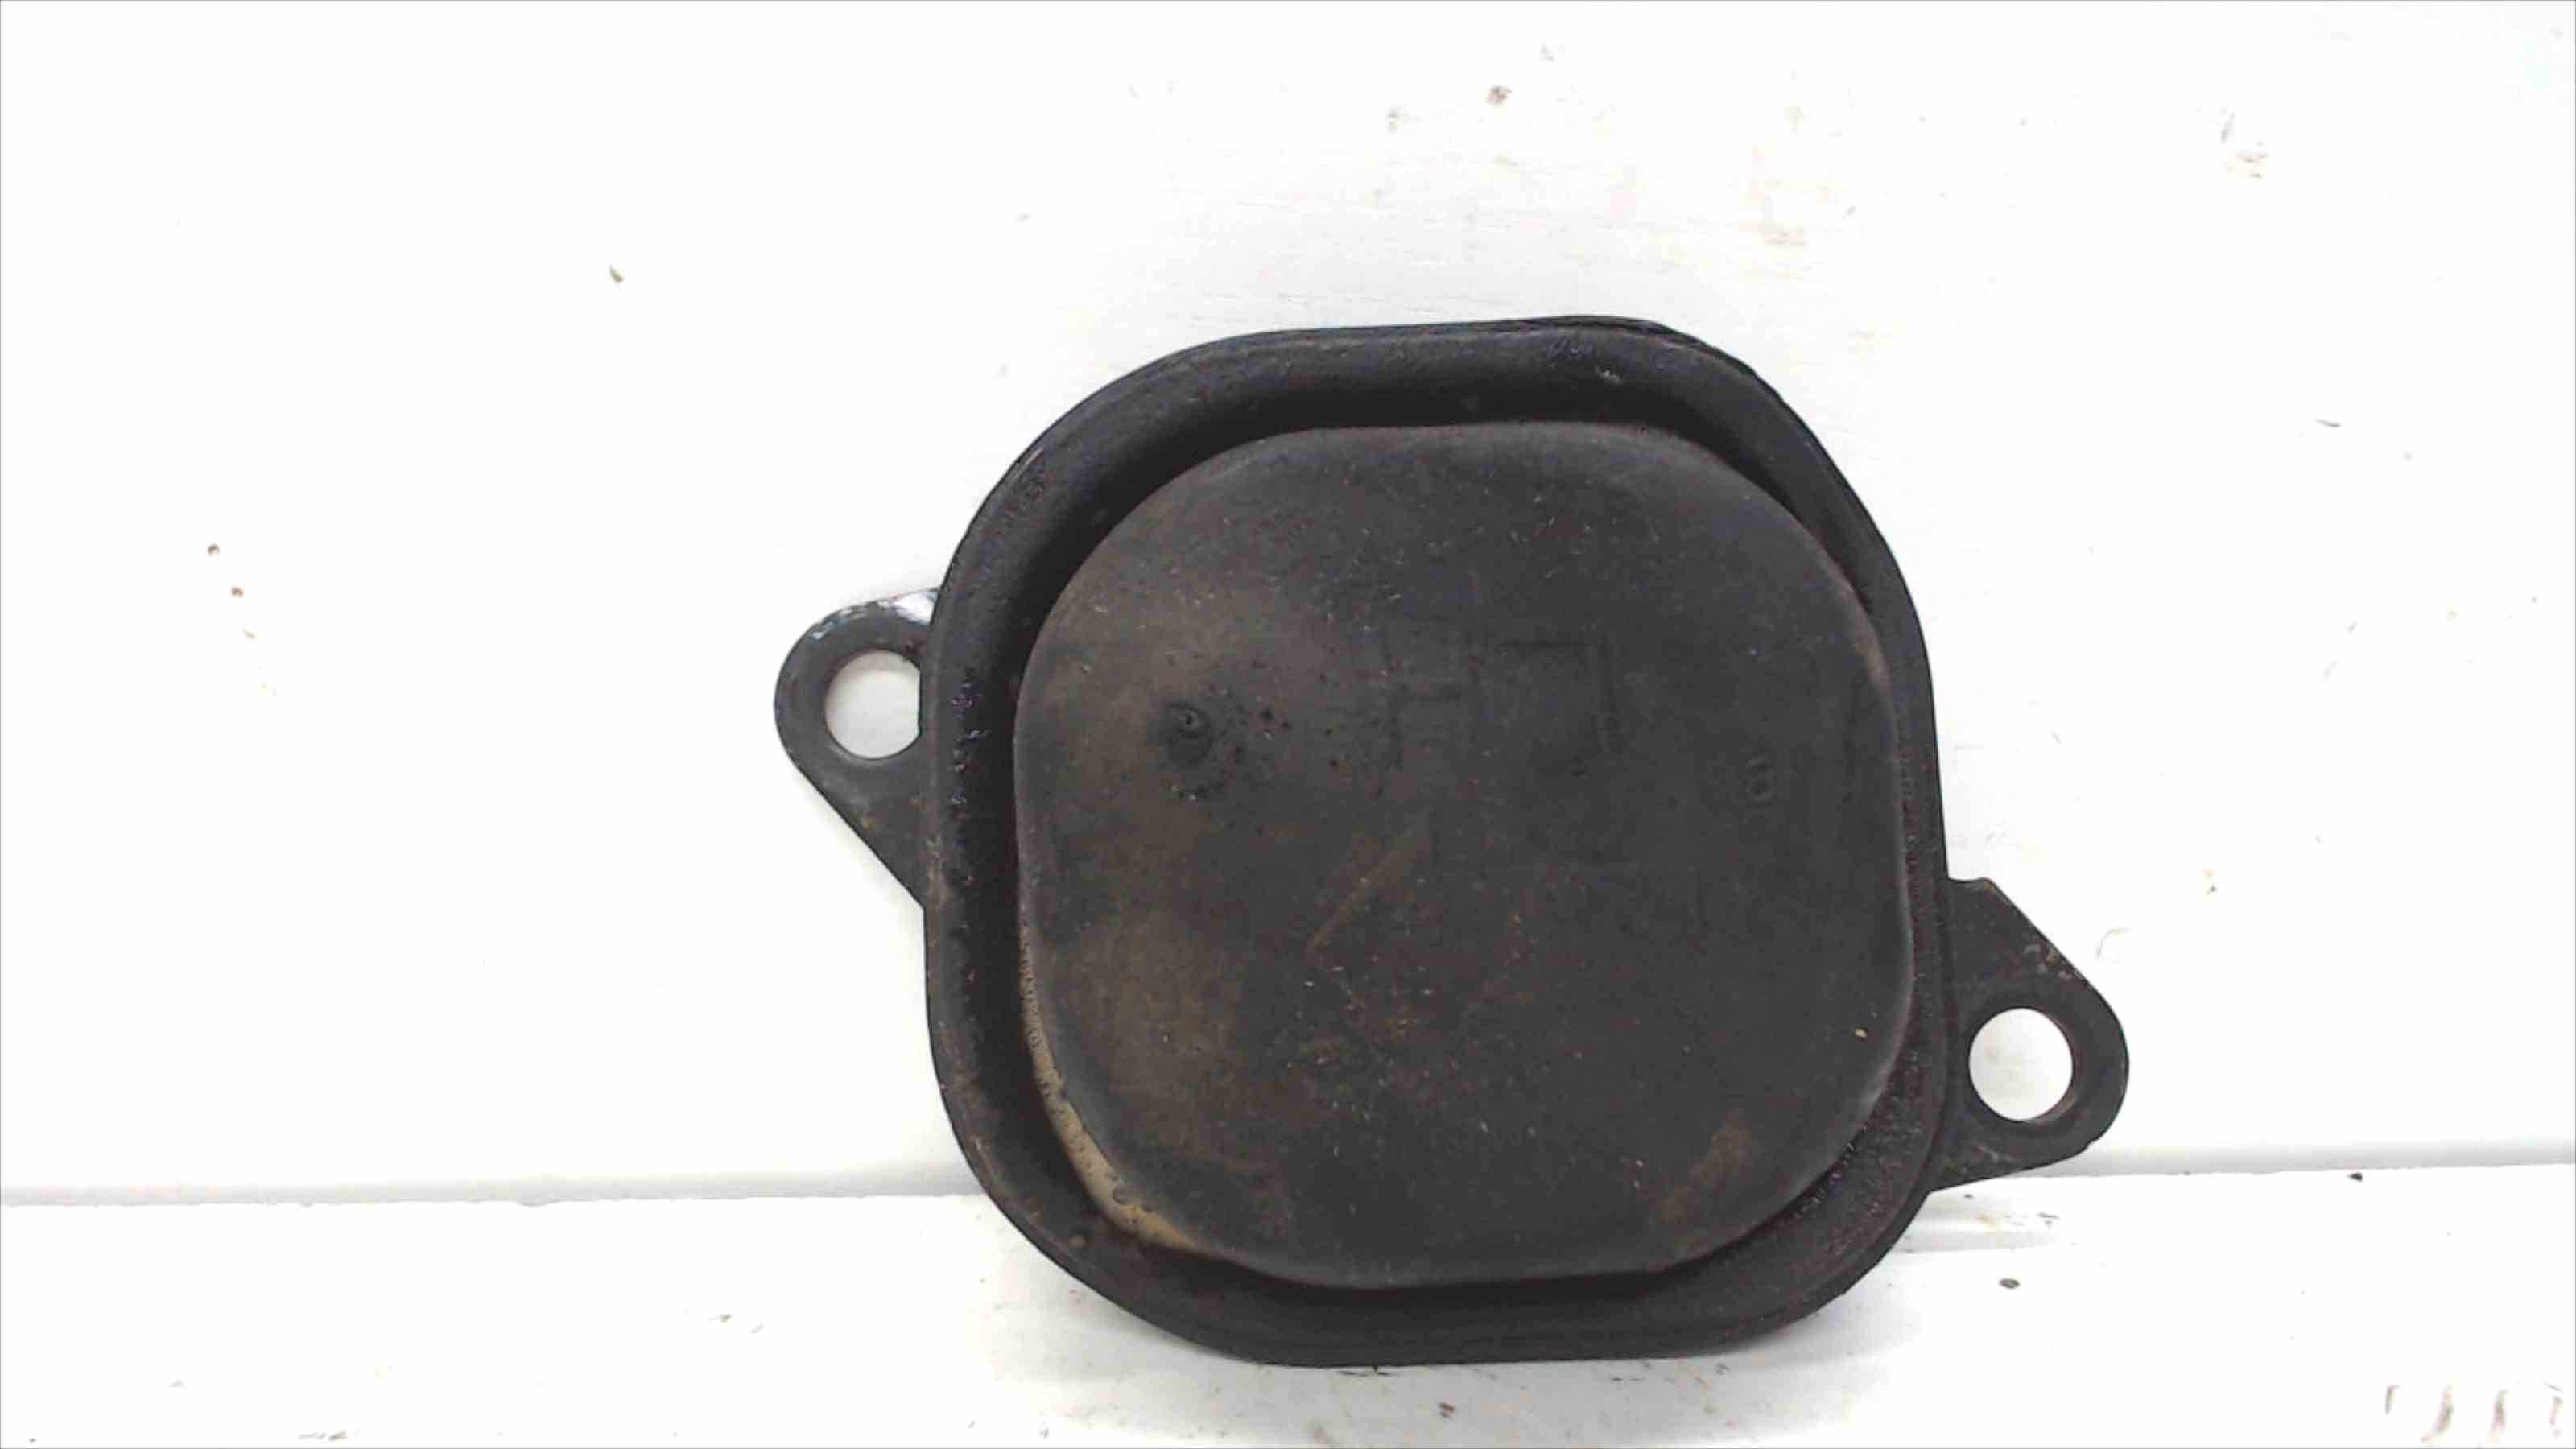 OPEL Frontera B (1998-2004) Other Engine Compartment Parts 24690498